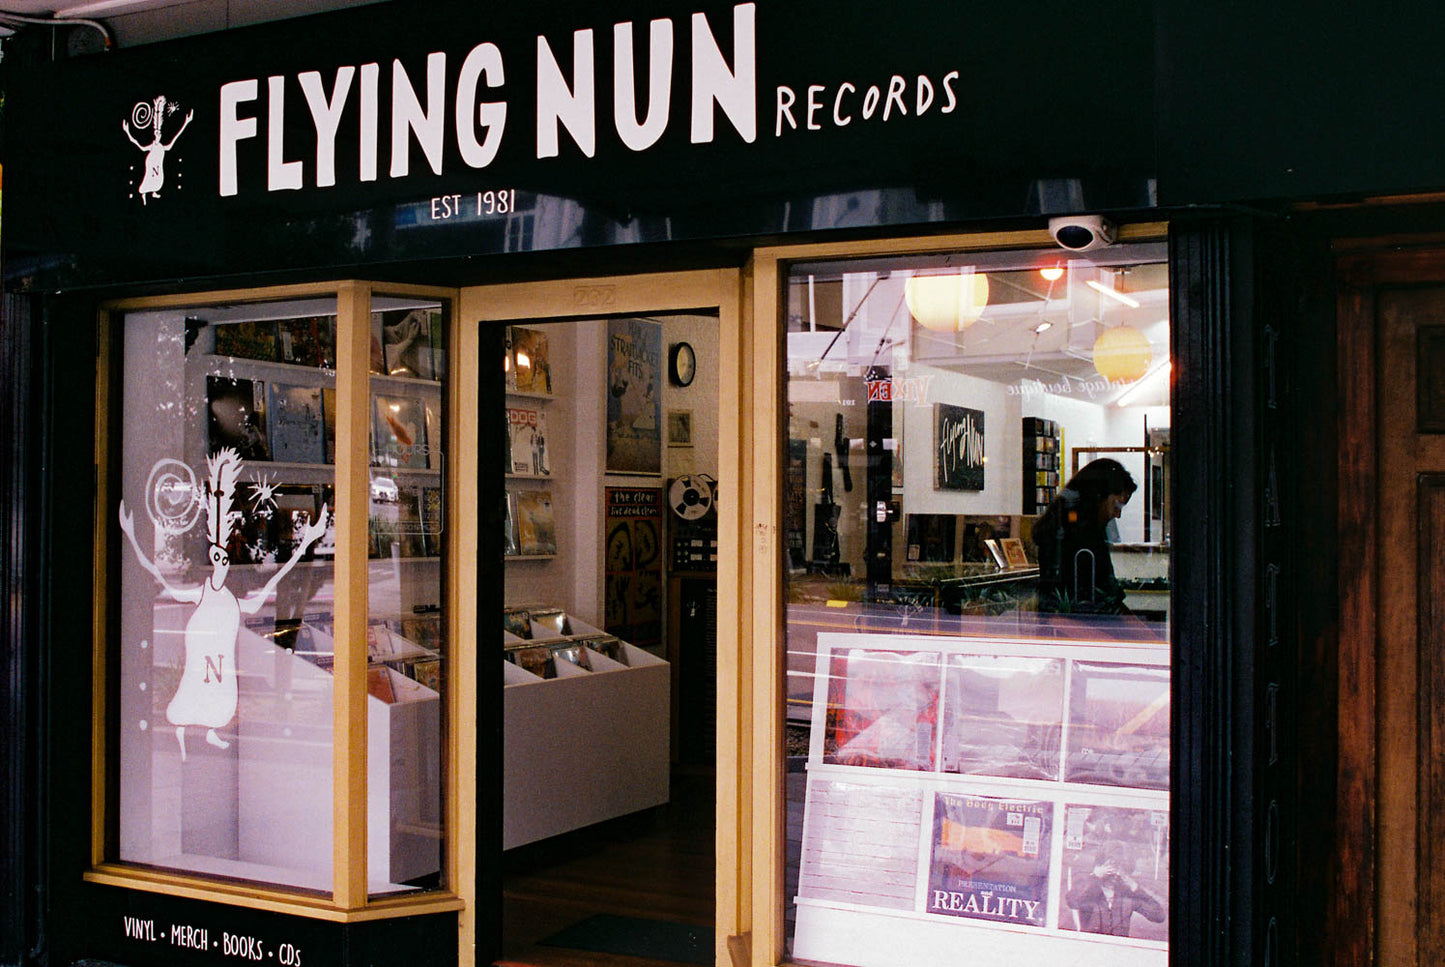 FLYING NUN RECORDS AUCKLAND